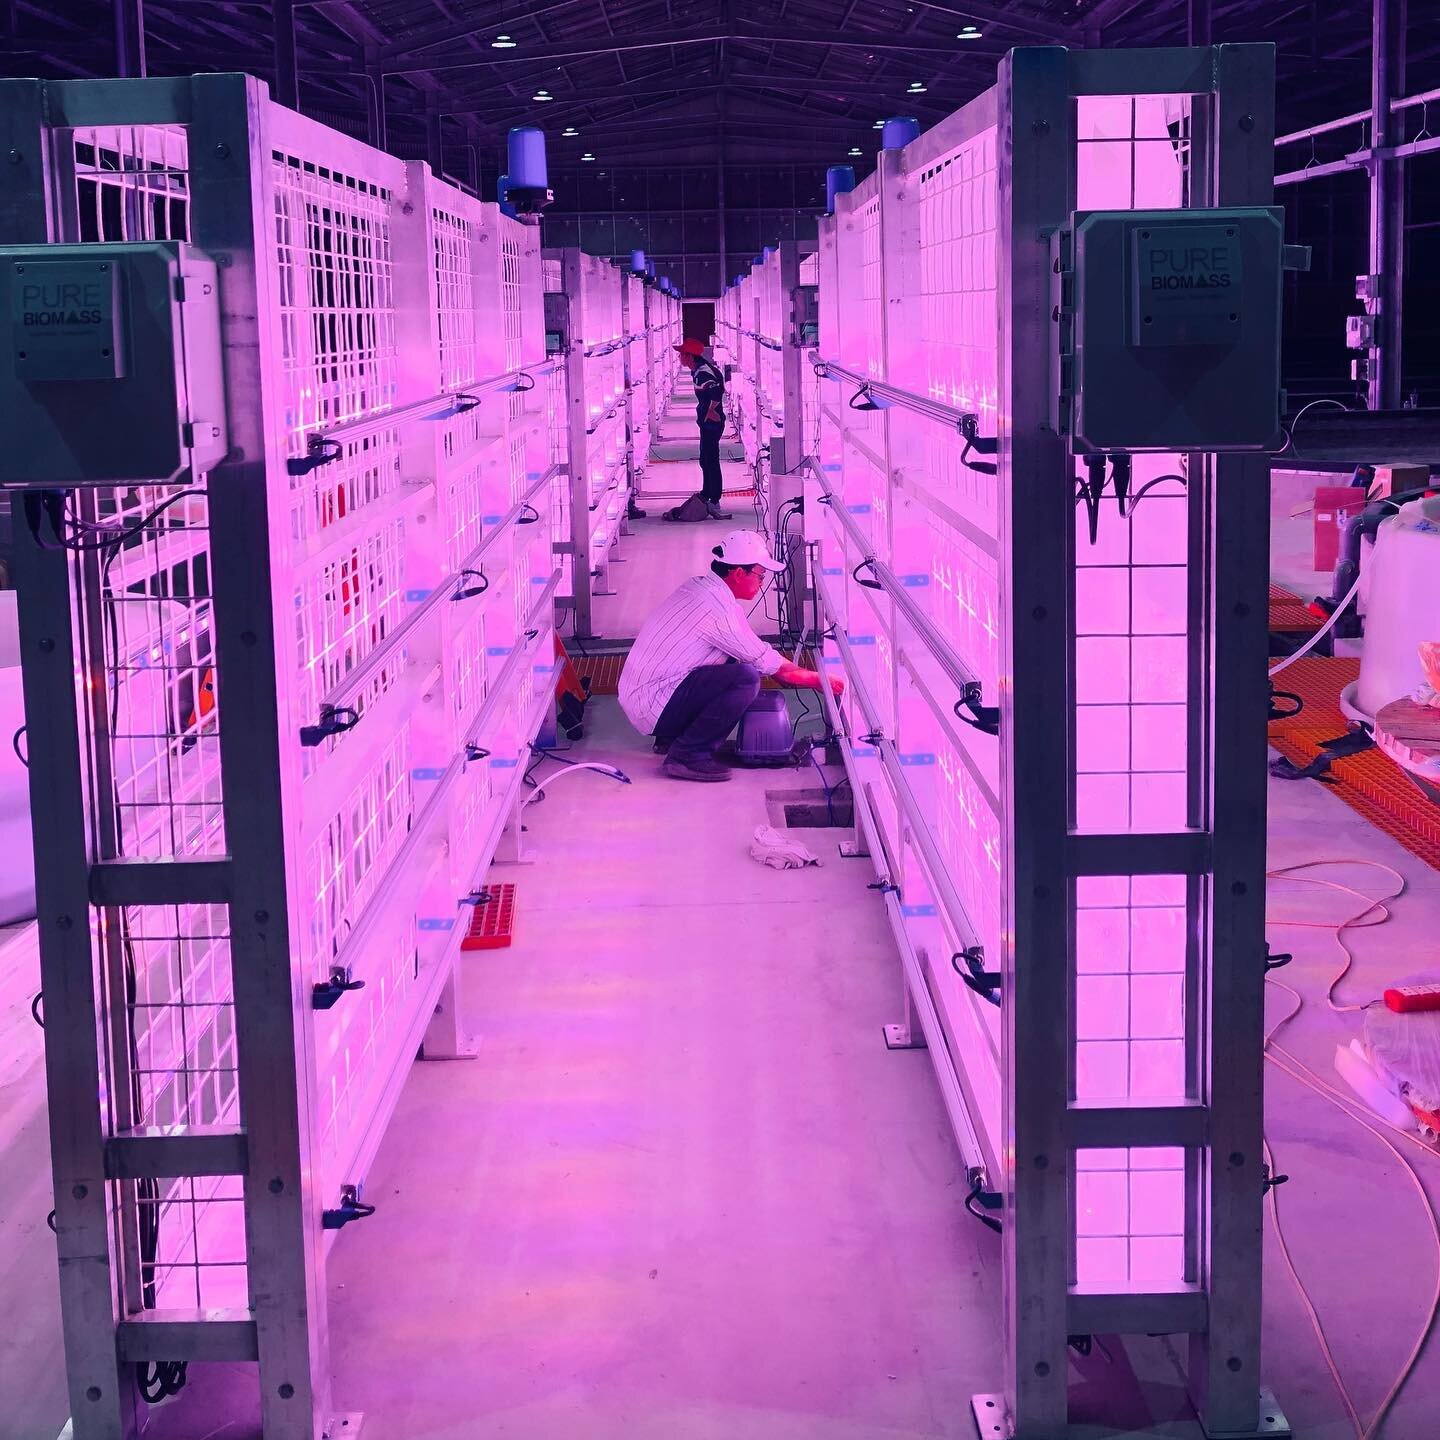 Several weeks back, before the world got turned on its head, we commissioned an array of our photo-bioreactor systems at a Vietnam facility we helped to design for large scale production of micro algae.  This state-of-the-art, solar powered facility 